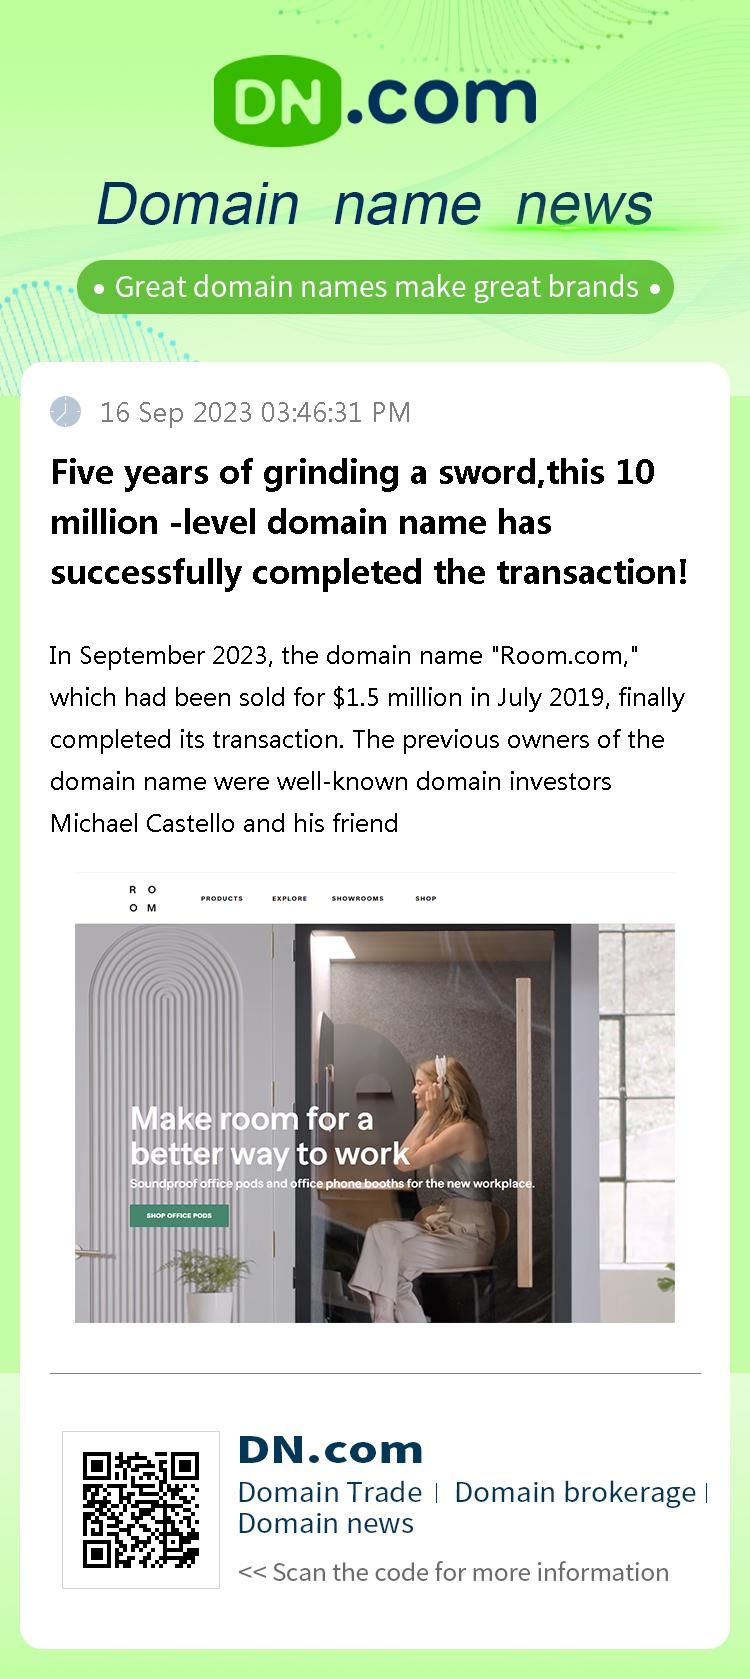 Five years of grinding a sword,this 10 million -level domain name has successfully completed the transaction!